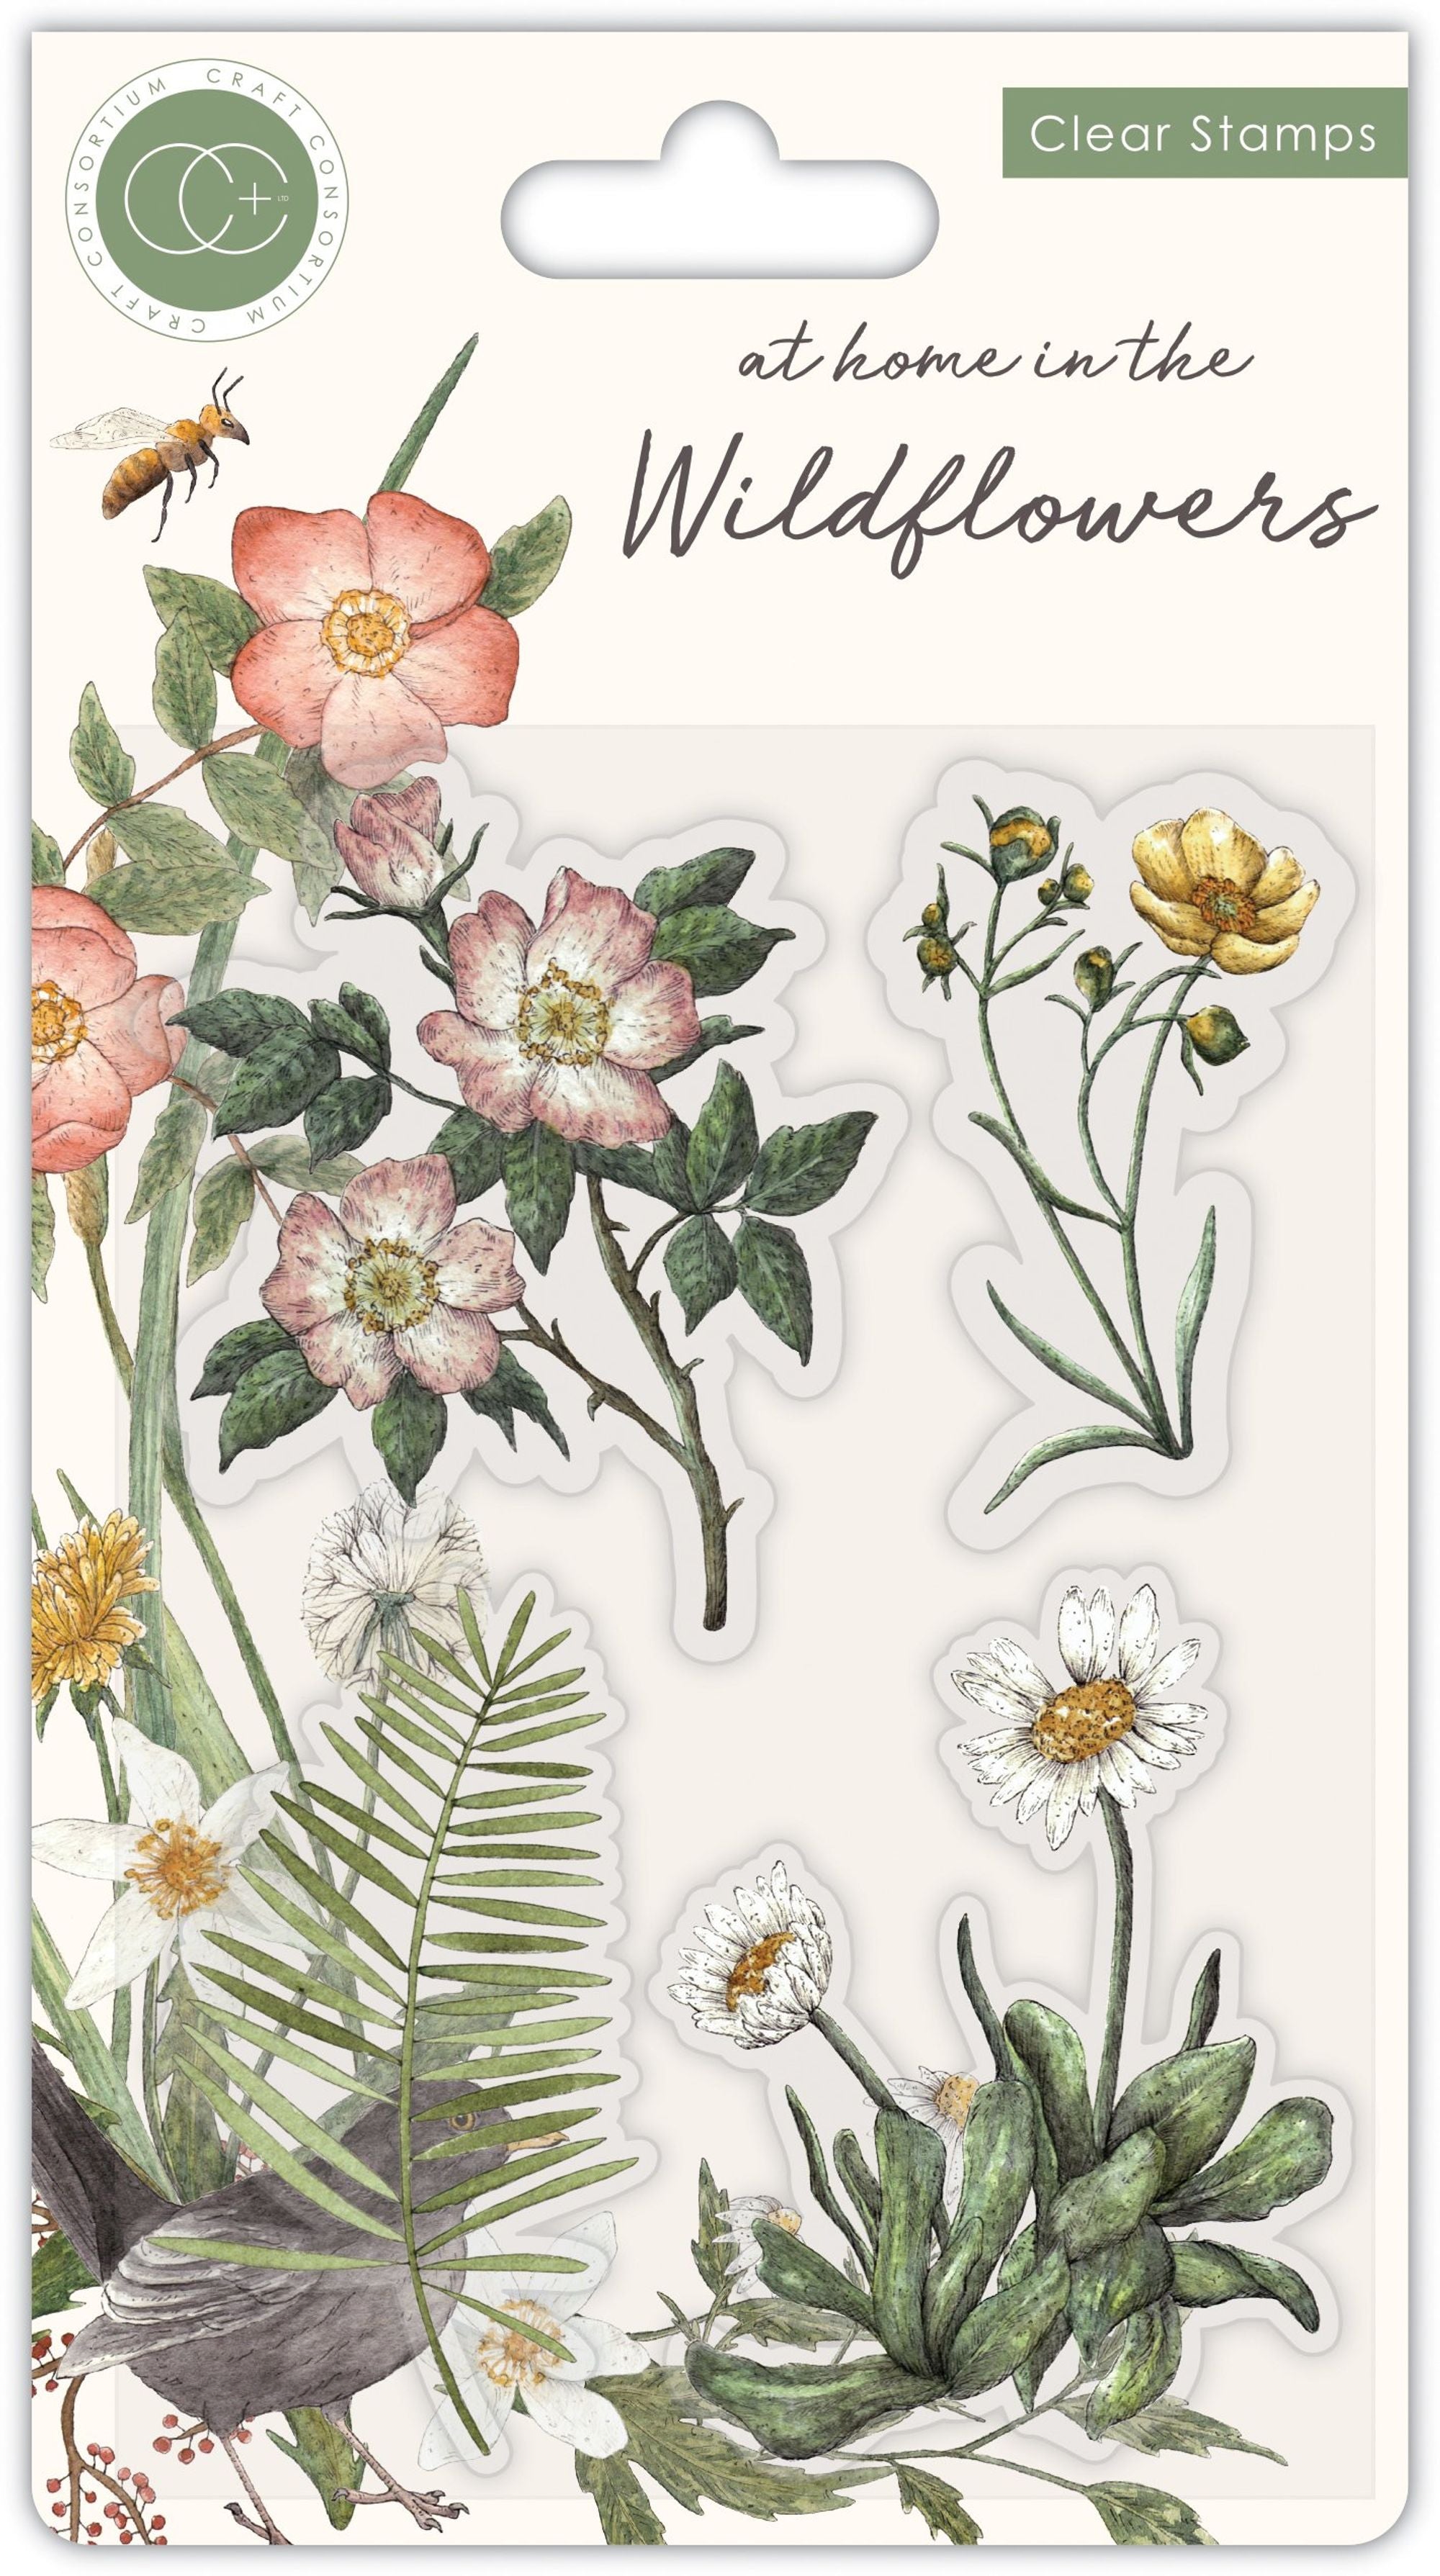 At home in the wildflowers - Stamp Set - Flora